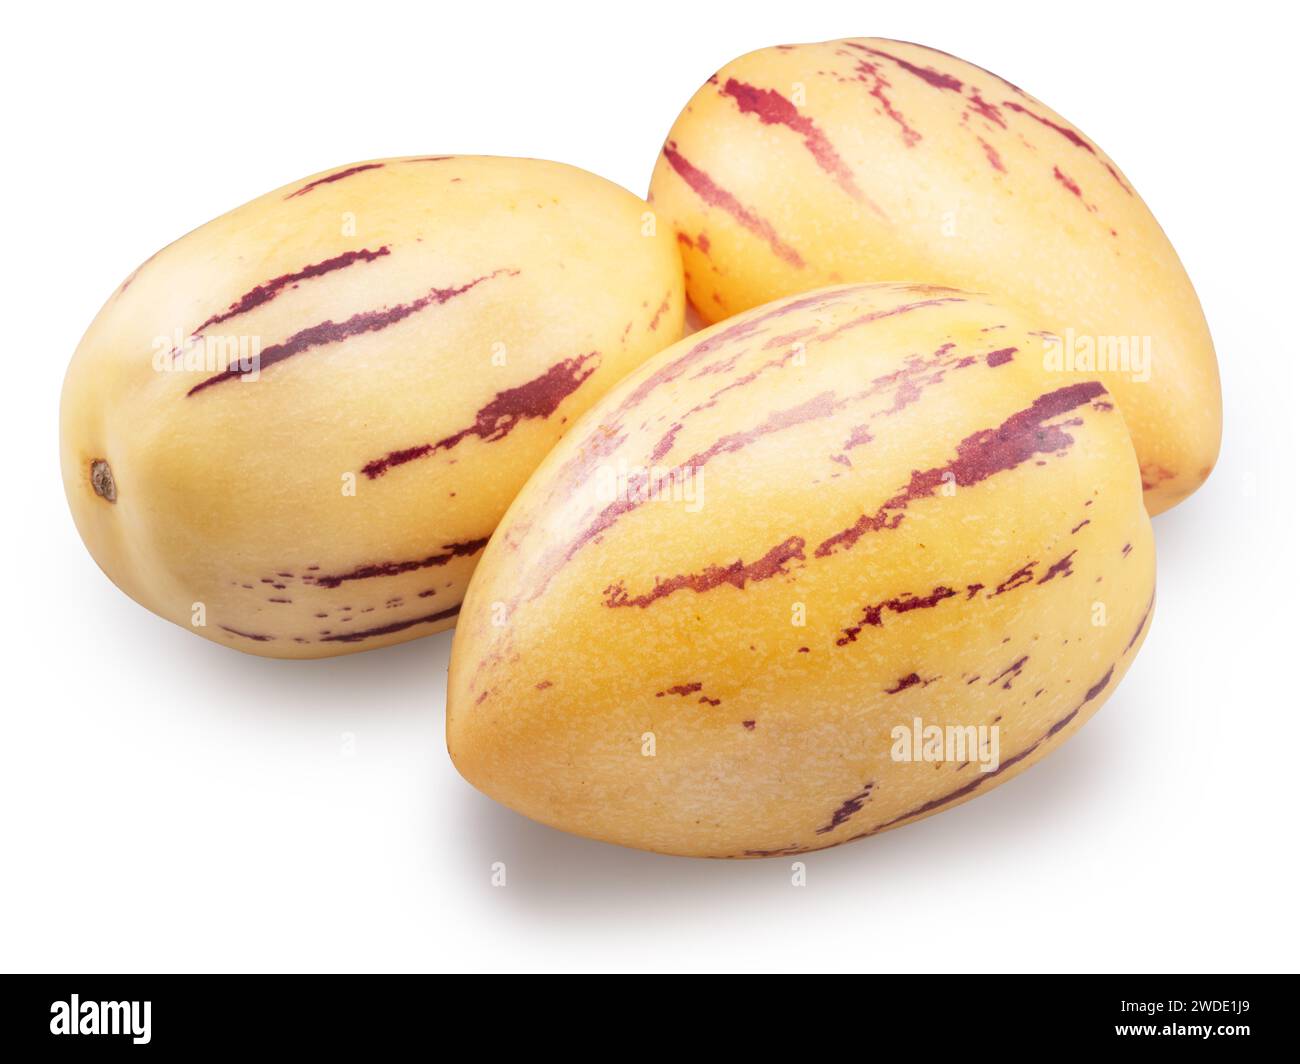 Pepino melons or pepino dulce on white background. File contains clipping path. Stock Photo